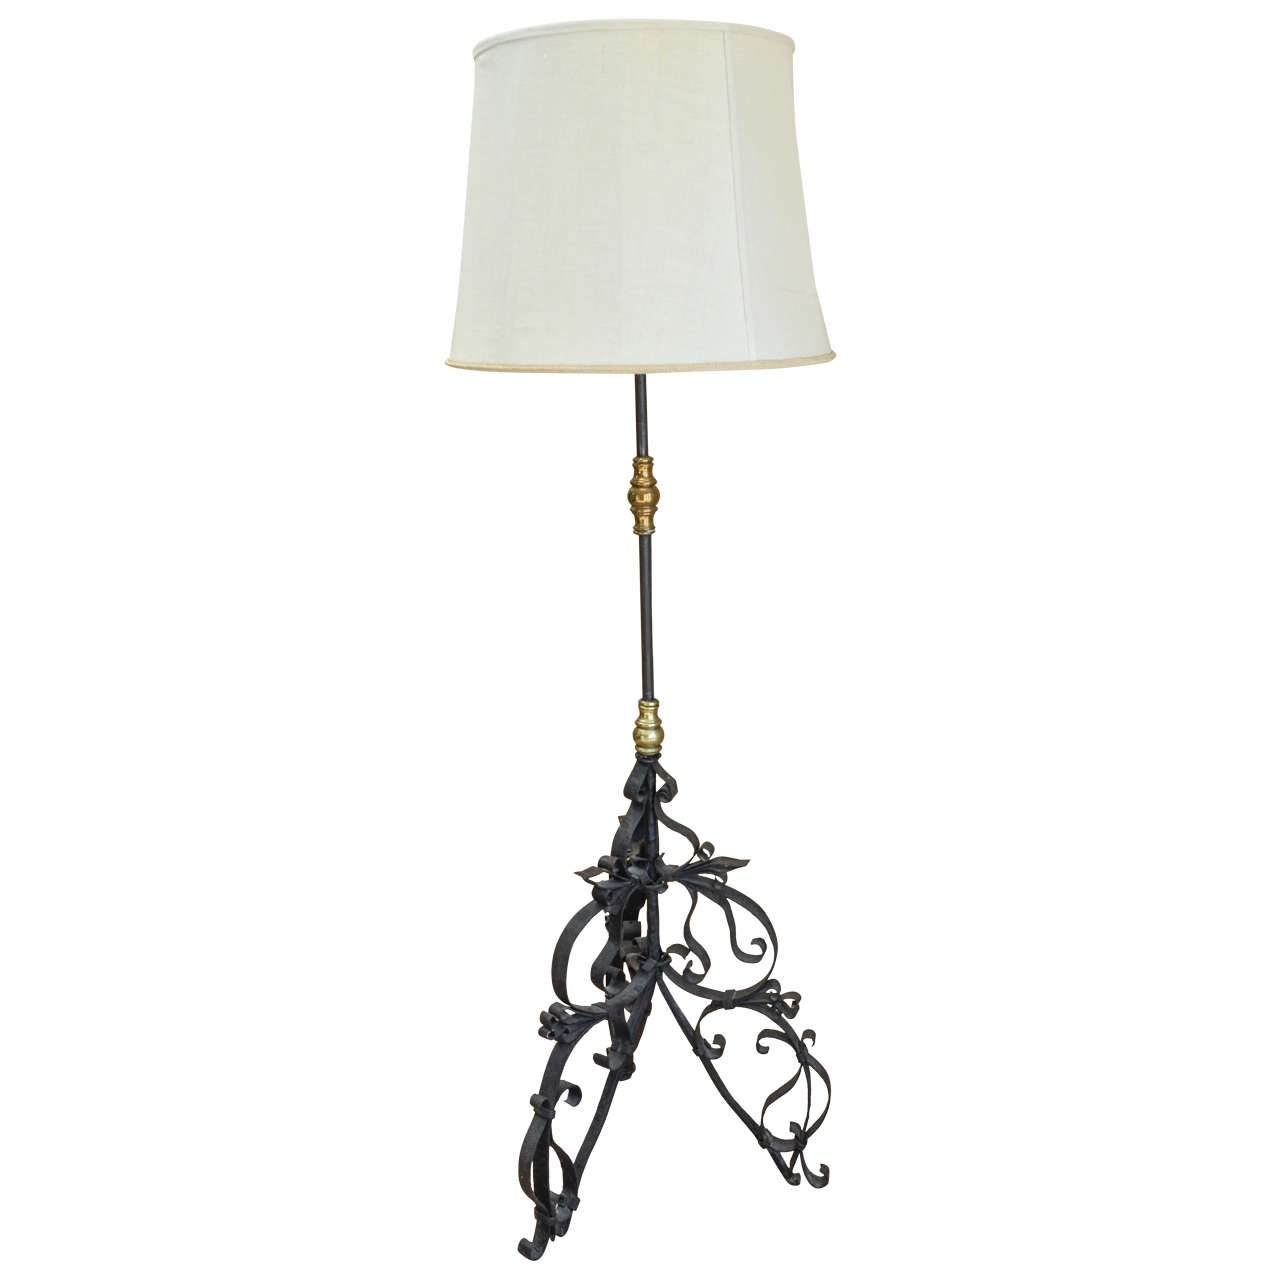 19th Century French Iron and Gilt Floor Lamp